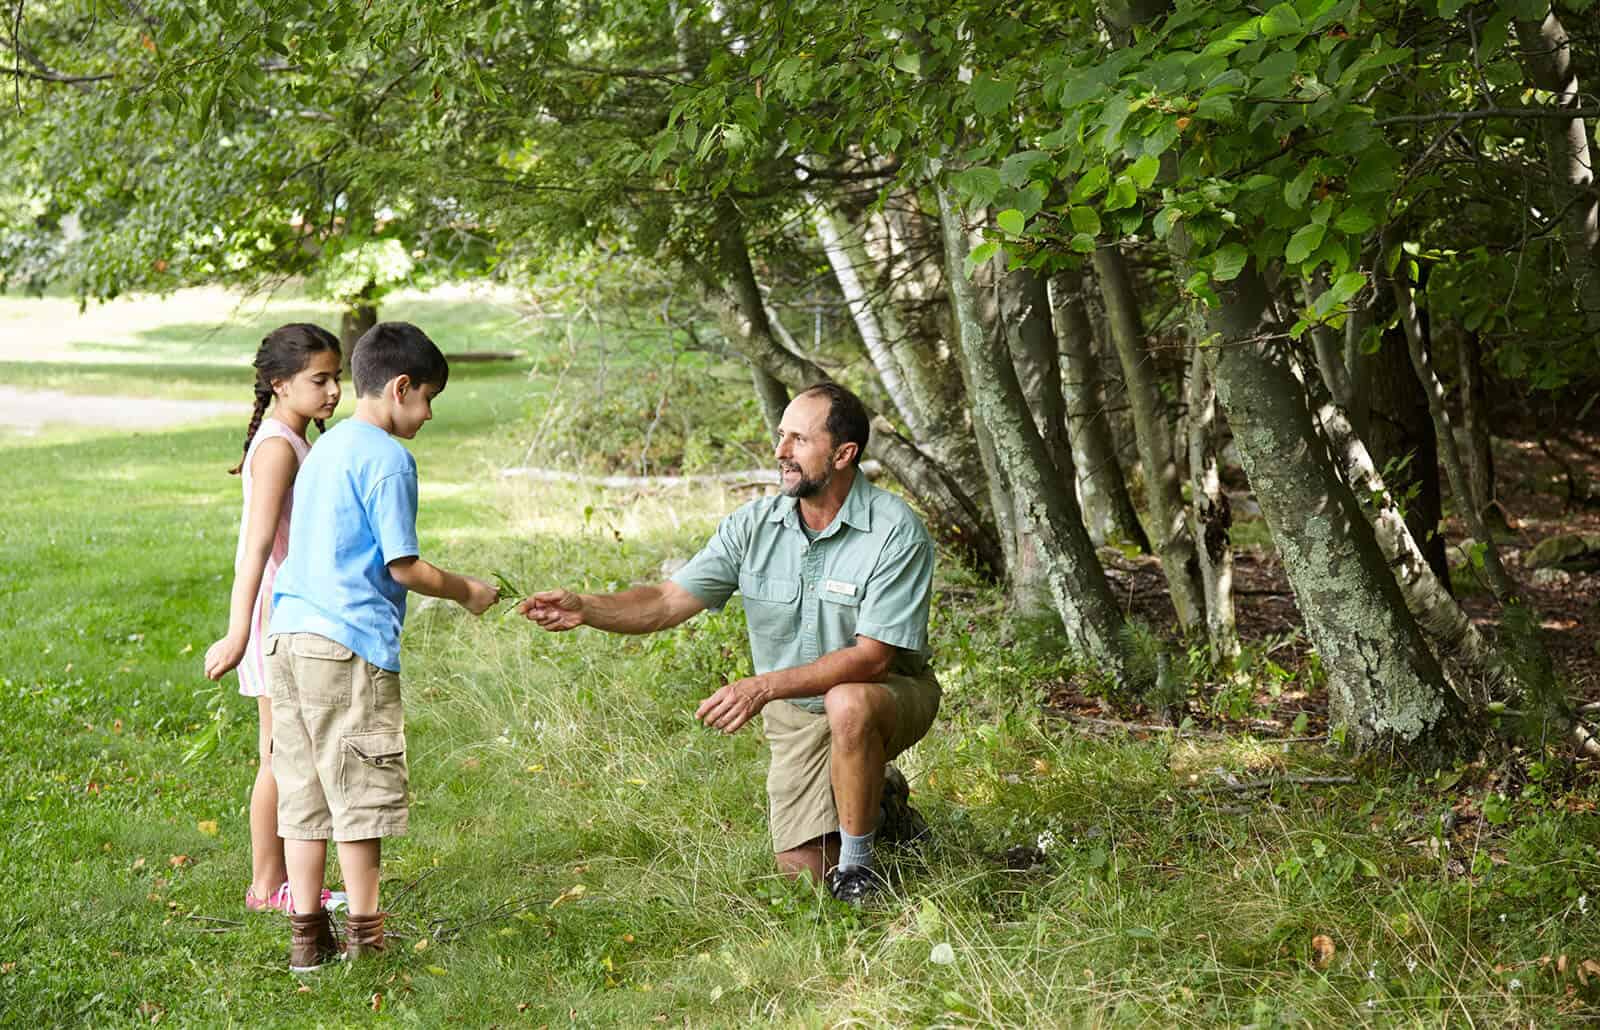 Naturalist showing plants to kids